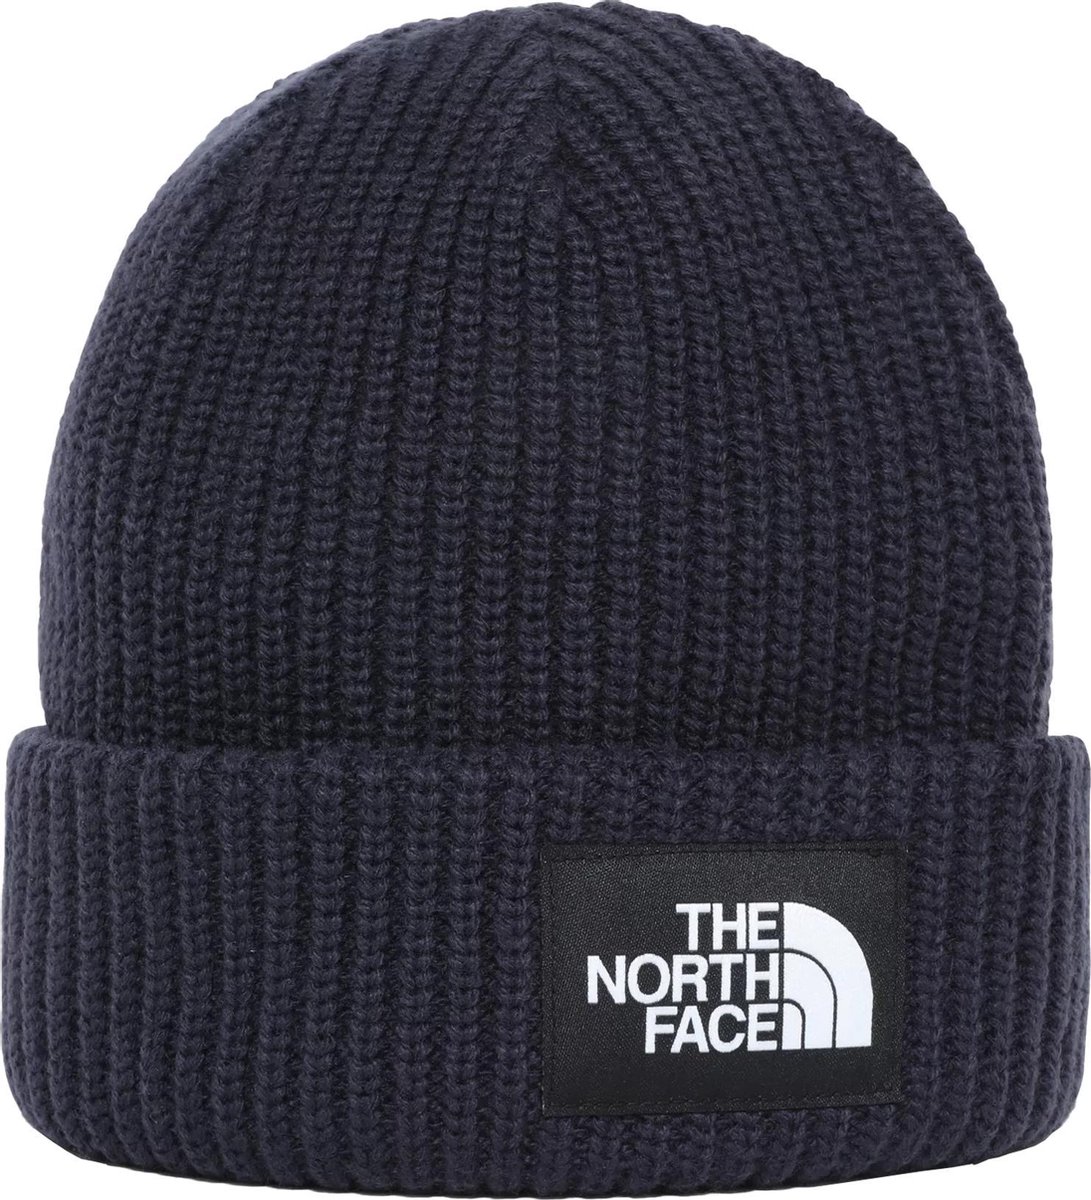 voor eeuwig optie Roux The North Face Muts (fashion) - Maat One size - Unisex - navy | bol.com